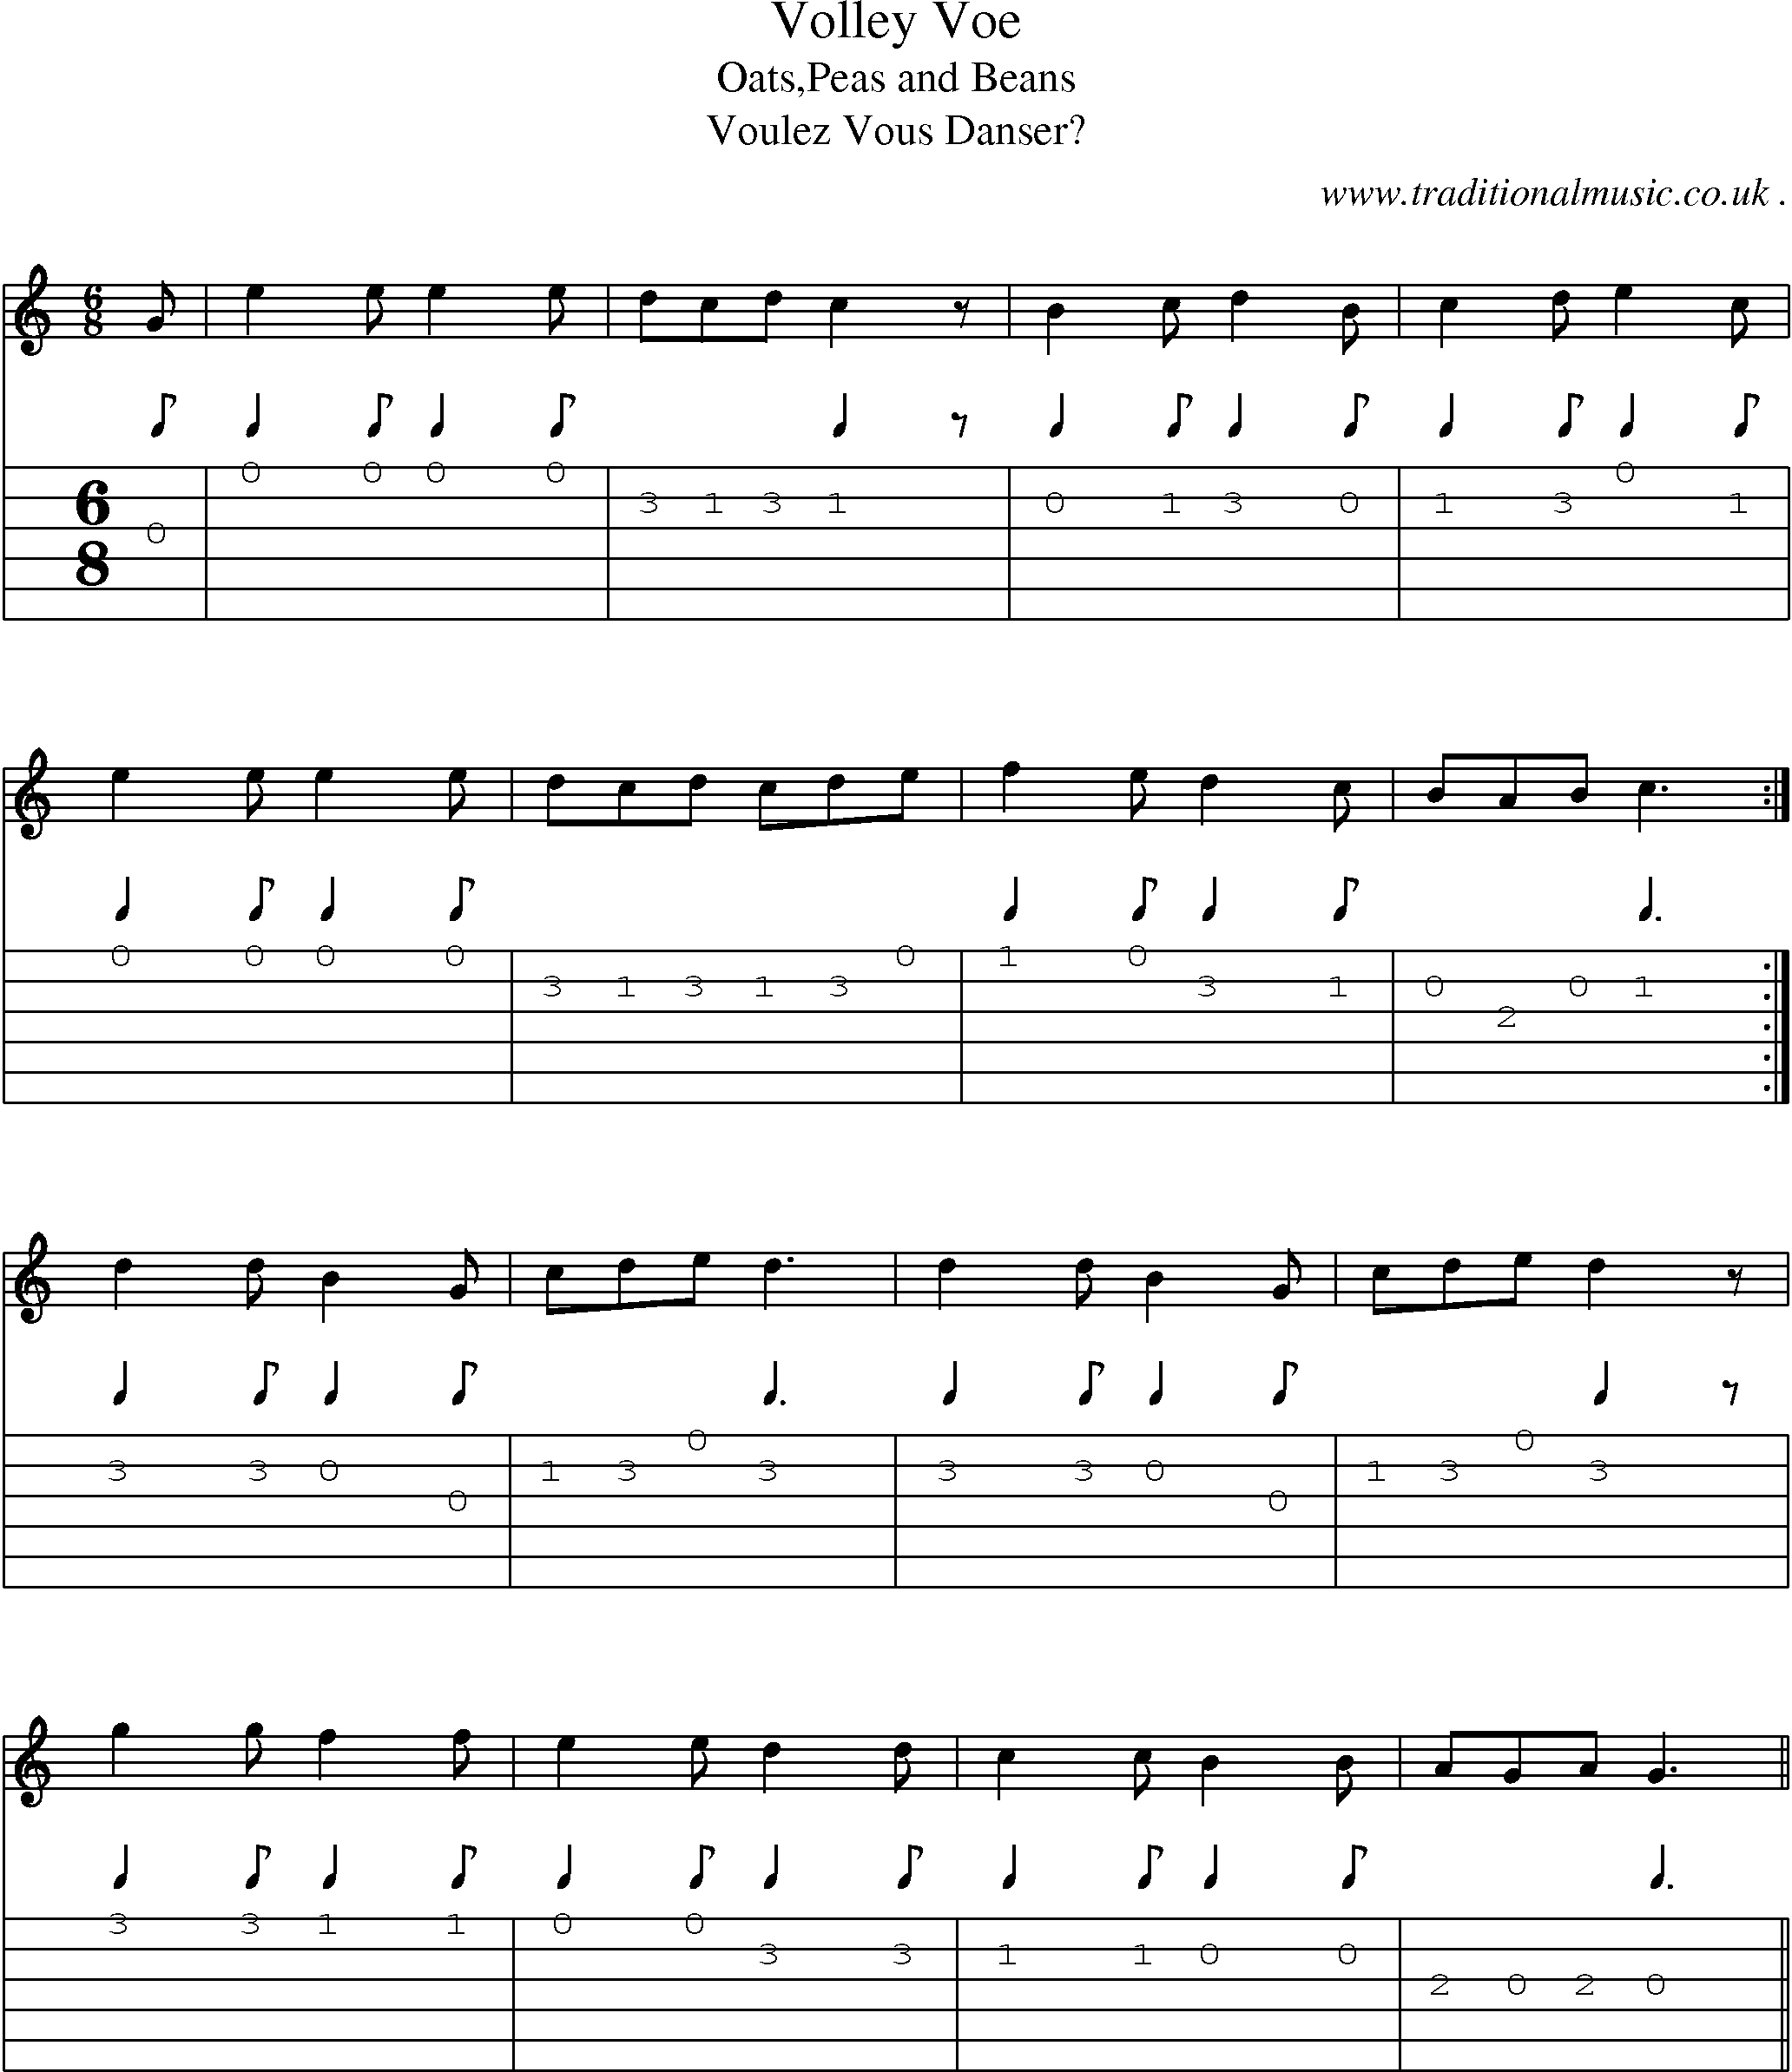 Sheet-Music and Guitar Tabs for Volley Voe